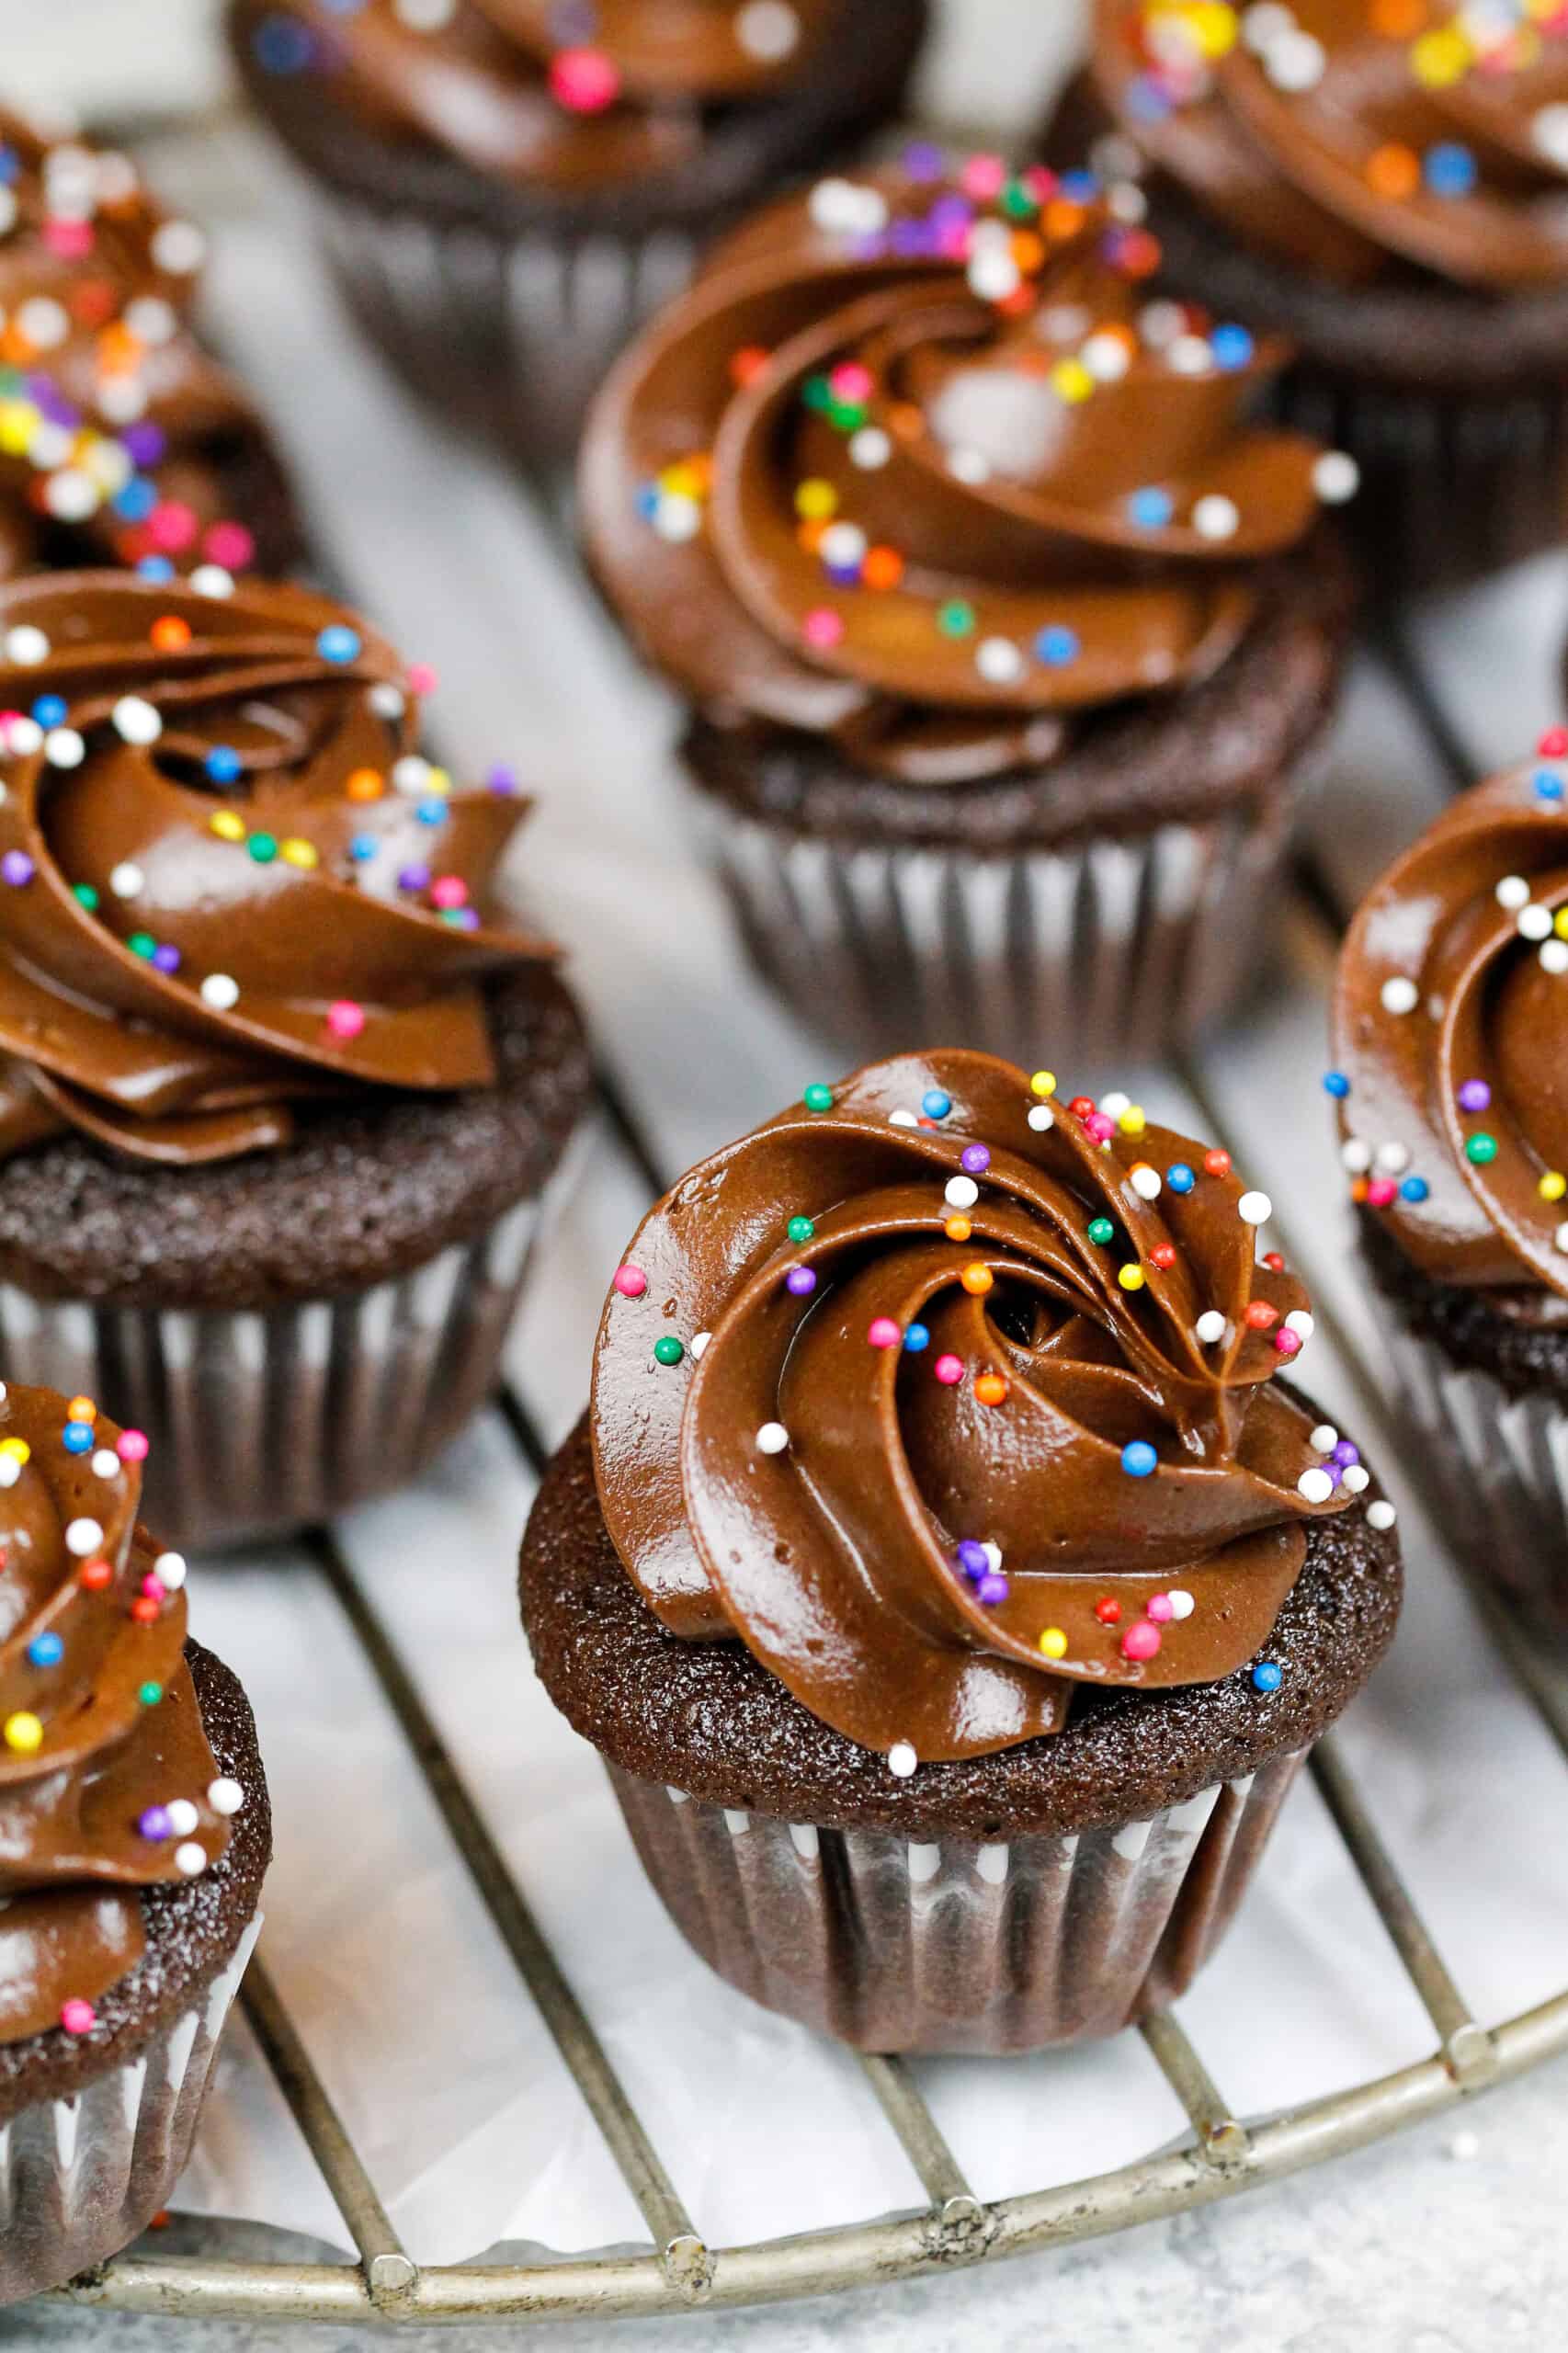 Moist Chocolate Cupcakes - Cakes by MK